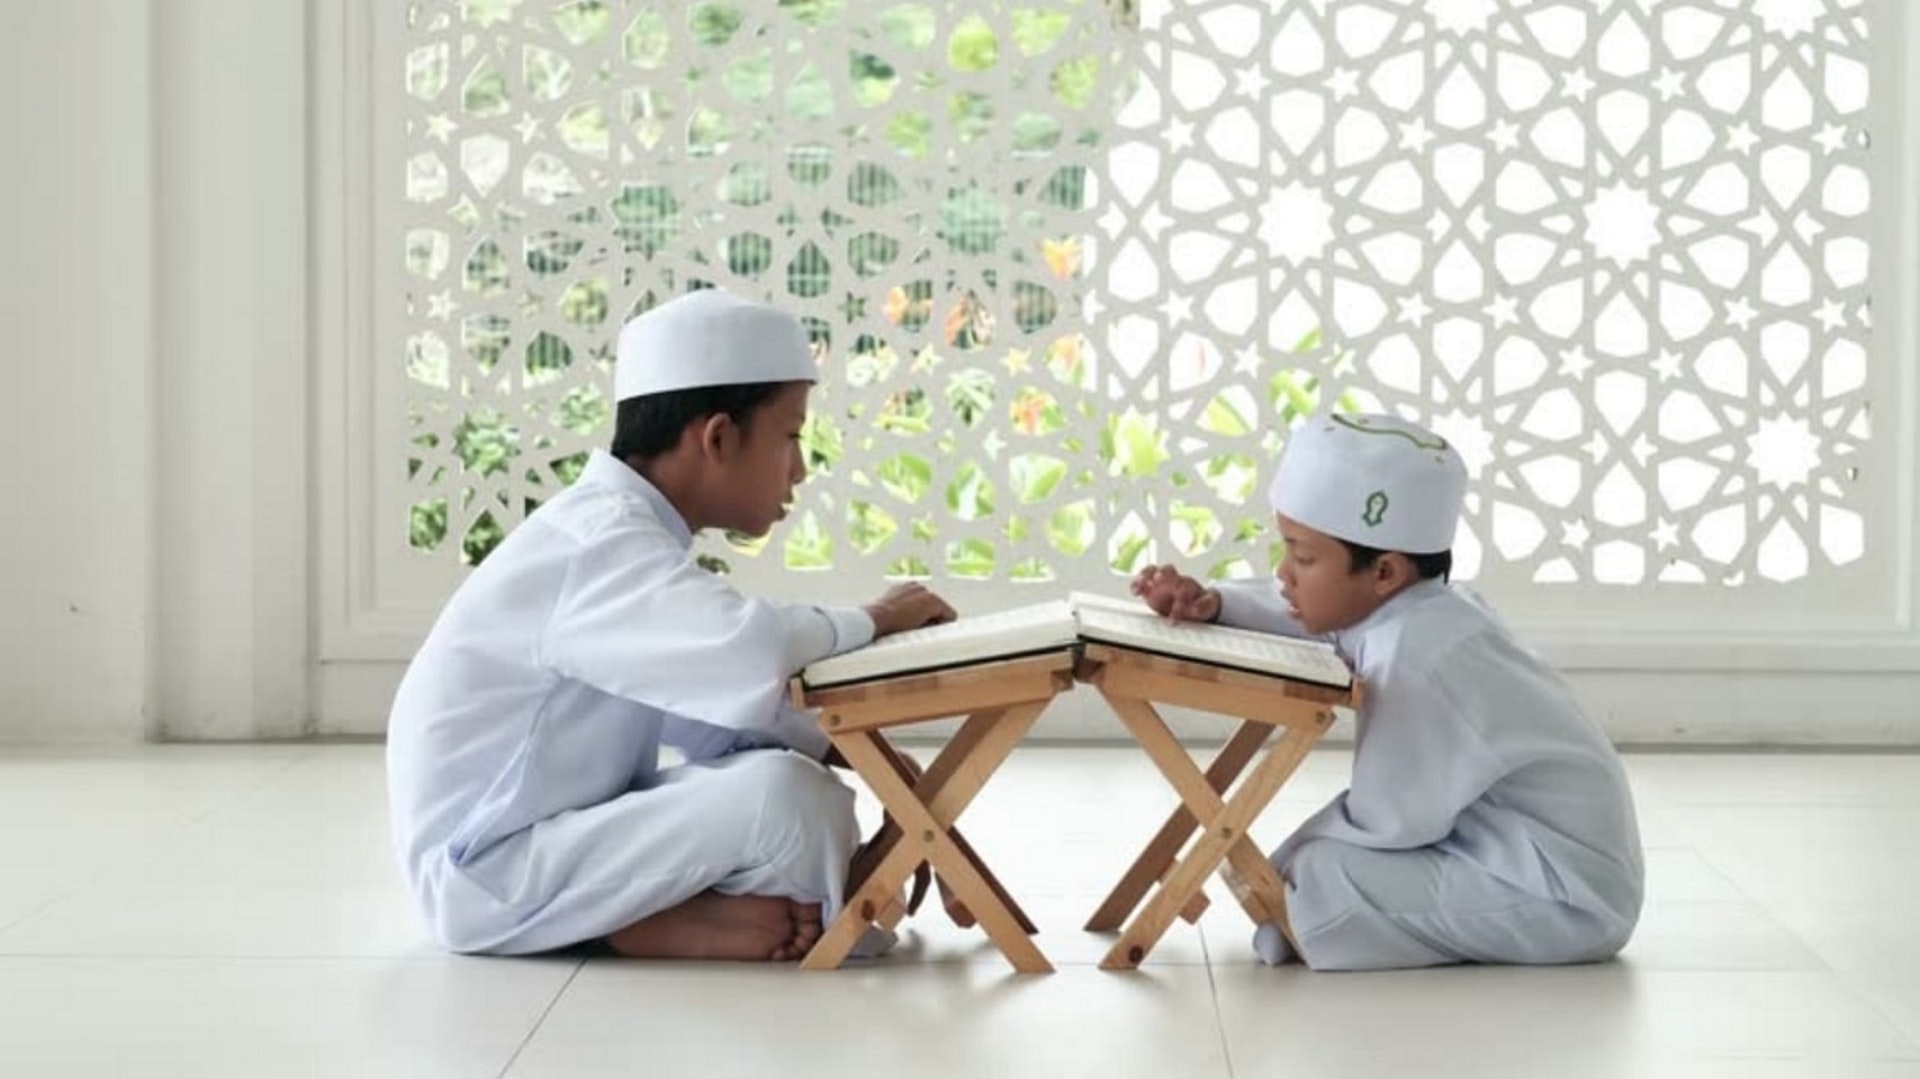 Two young children, one younger than the other, wearing white clothes and hats, sitting cross-legged and facing one another. They each have a small table in front of them with a large book on top. Both children are reading from the books.